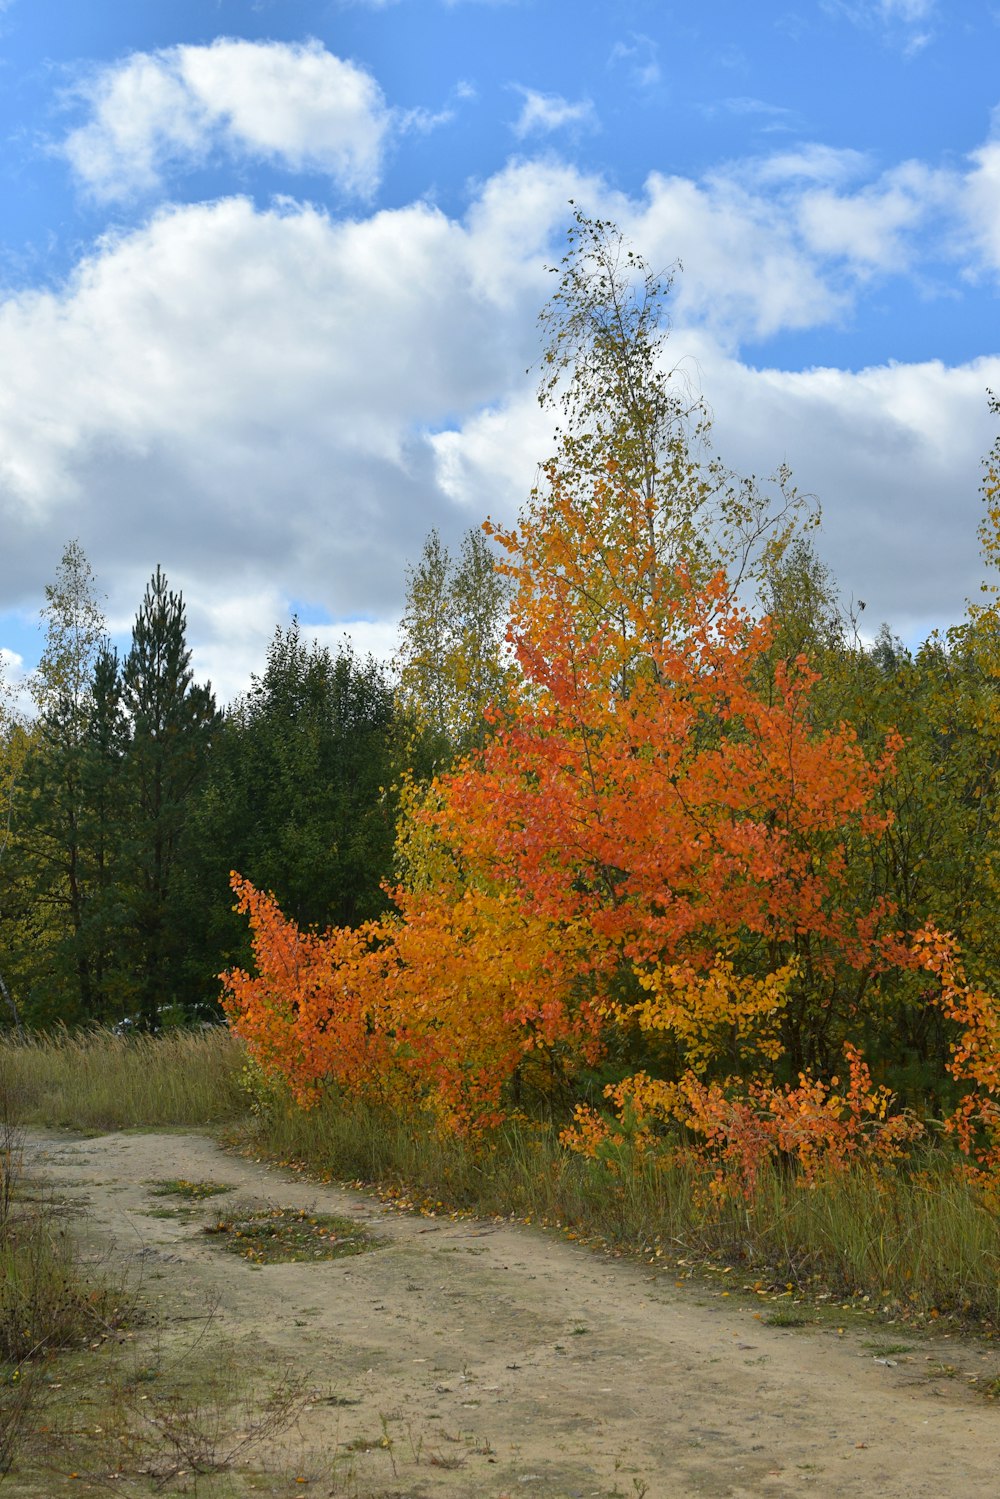 a dirt road surrounded by trees with orange and yellow leaves